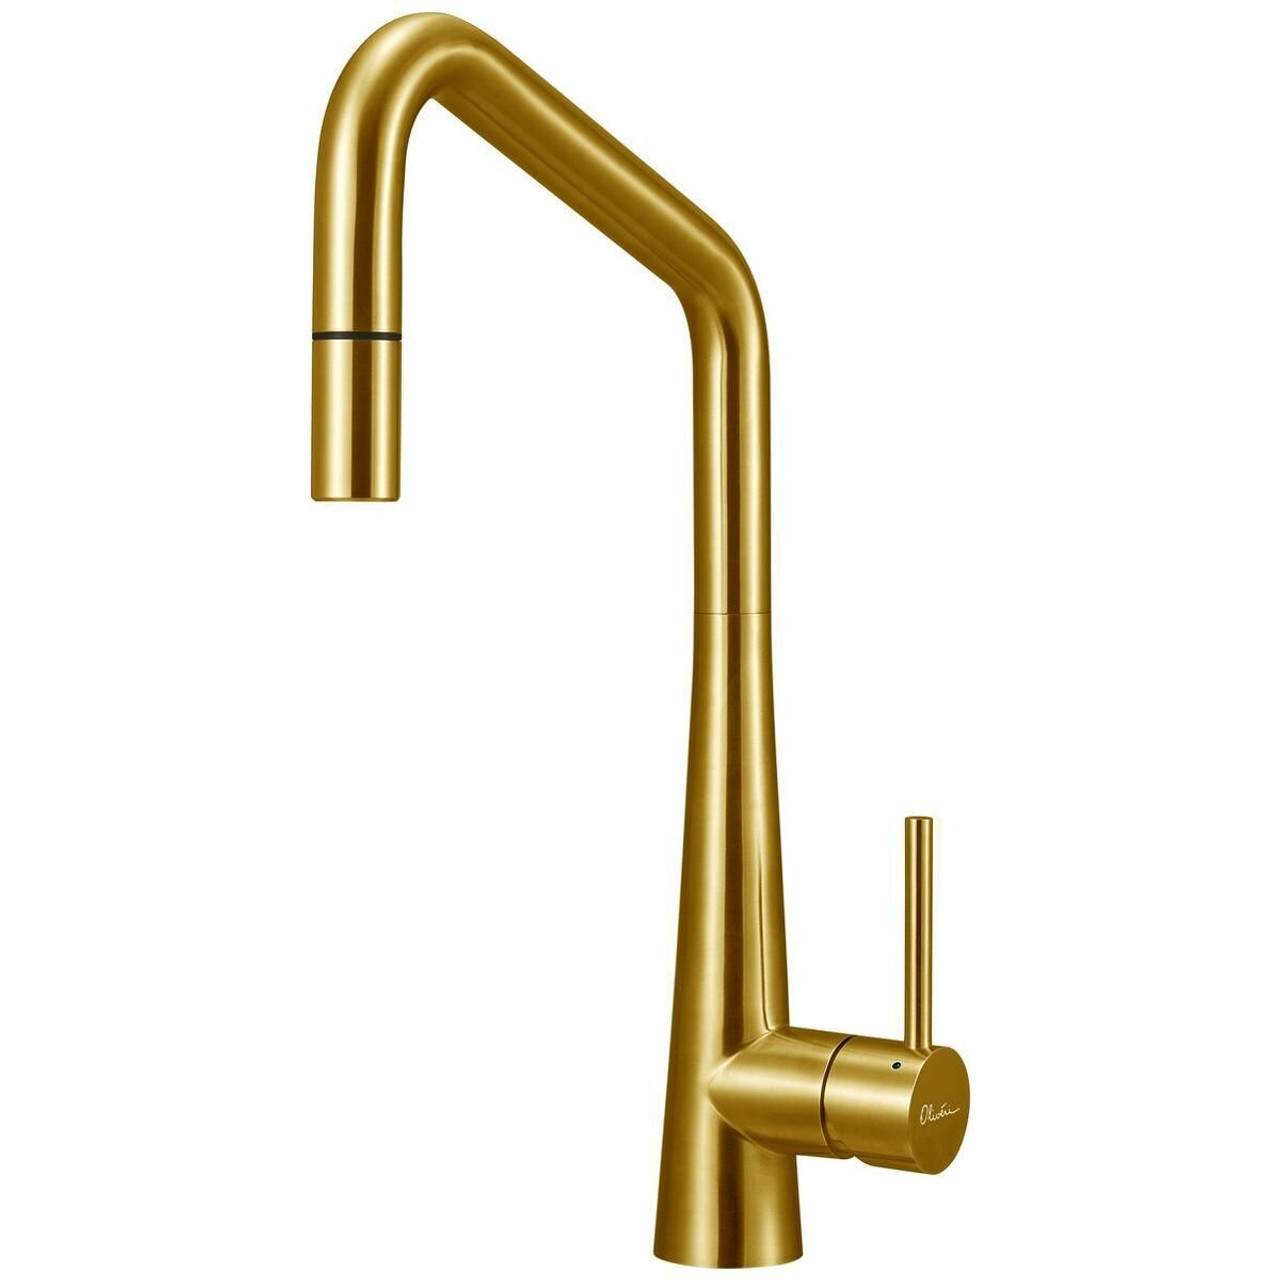 SS2575AU – Essente Square Neck Pull Out Mixer Tap - Gold